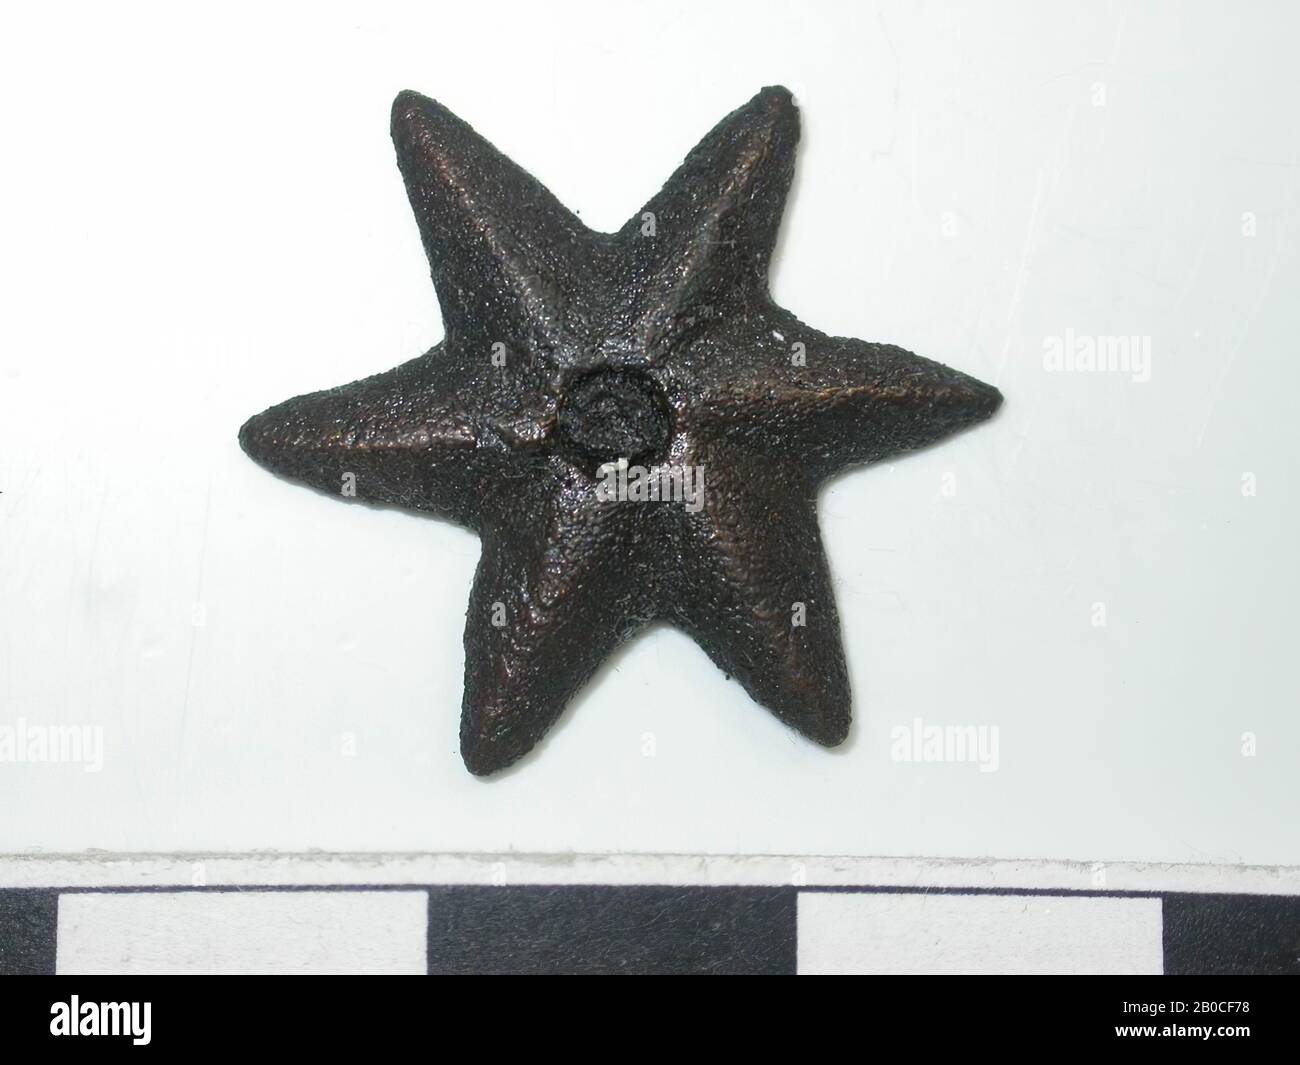 Star, gold-colored, red with dark spots (copper alloy). Star with 6 points.  A pin is stuck in the middle. Back is flat. 1 pin attachment. Pin is round.  Length is not measurable.